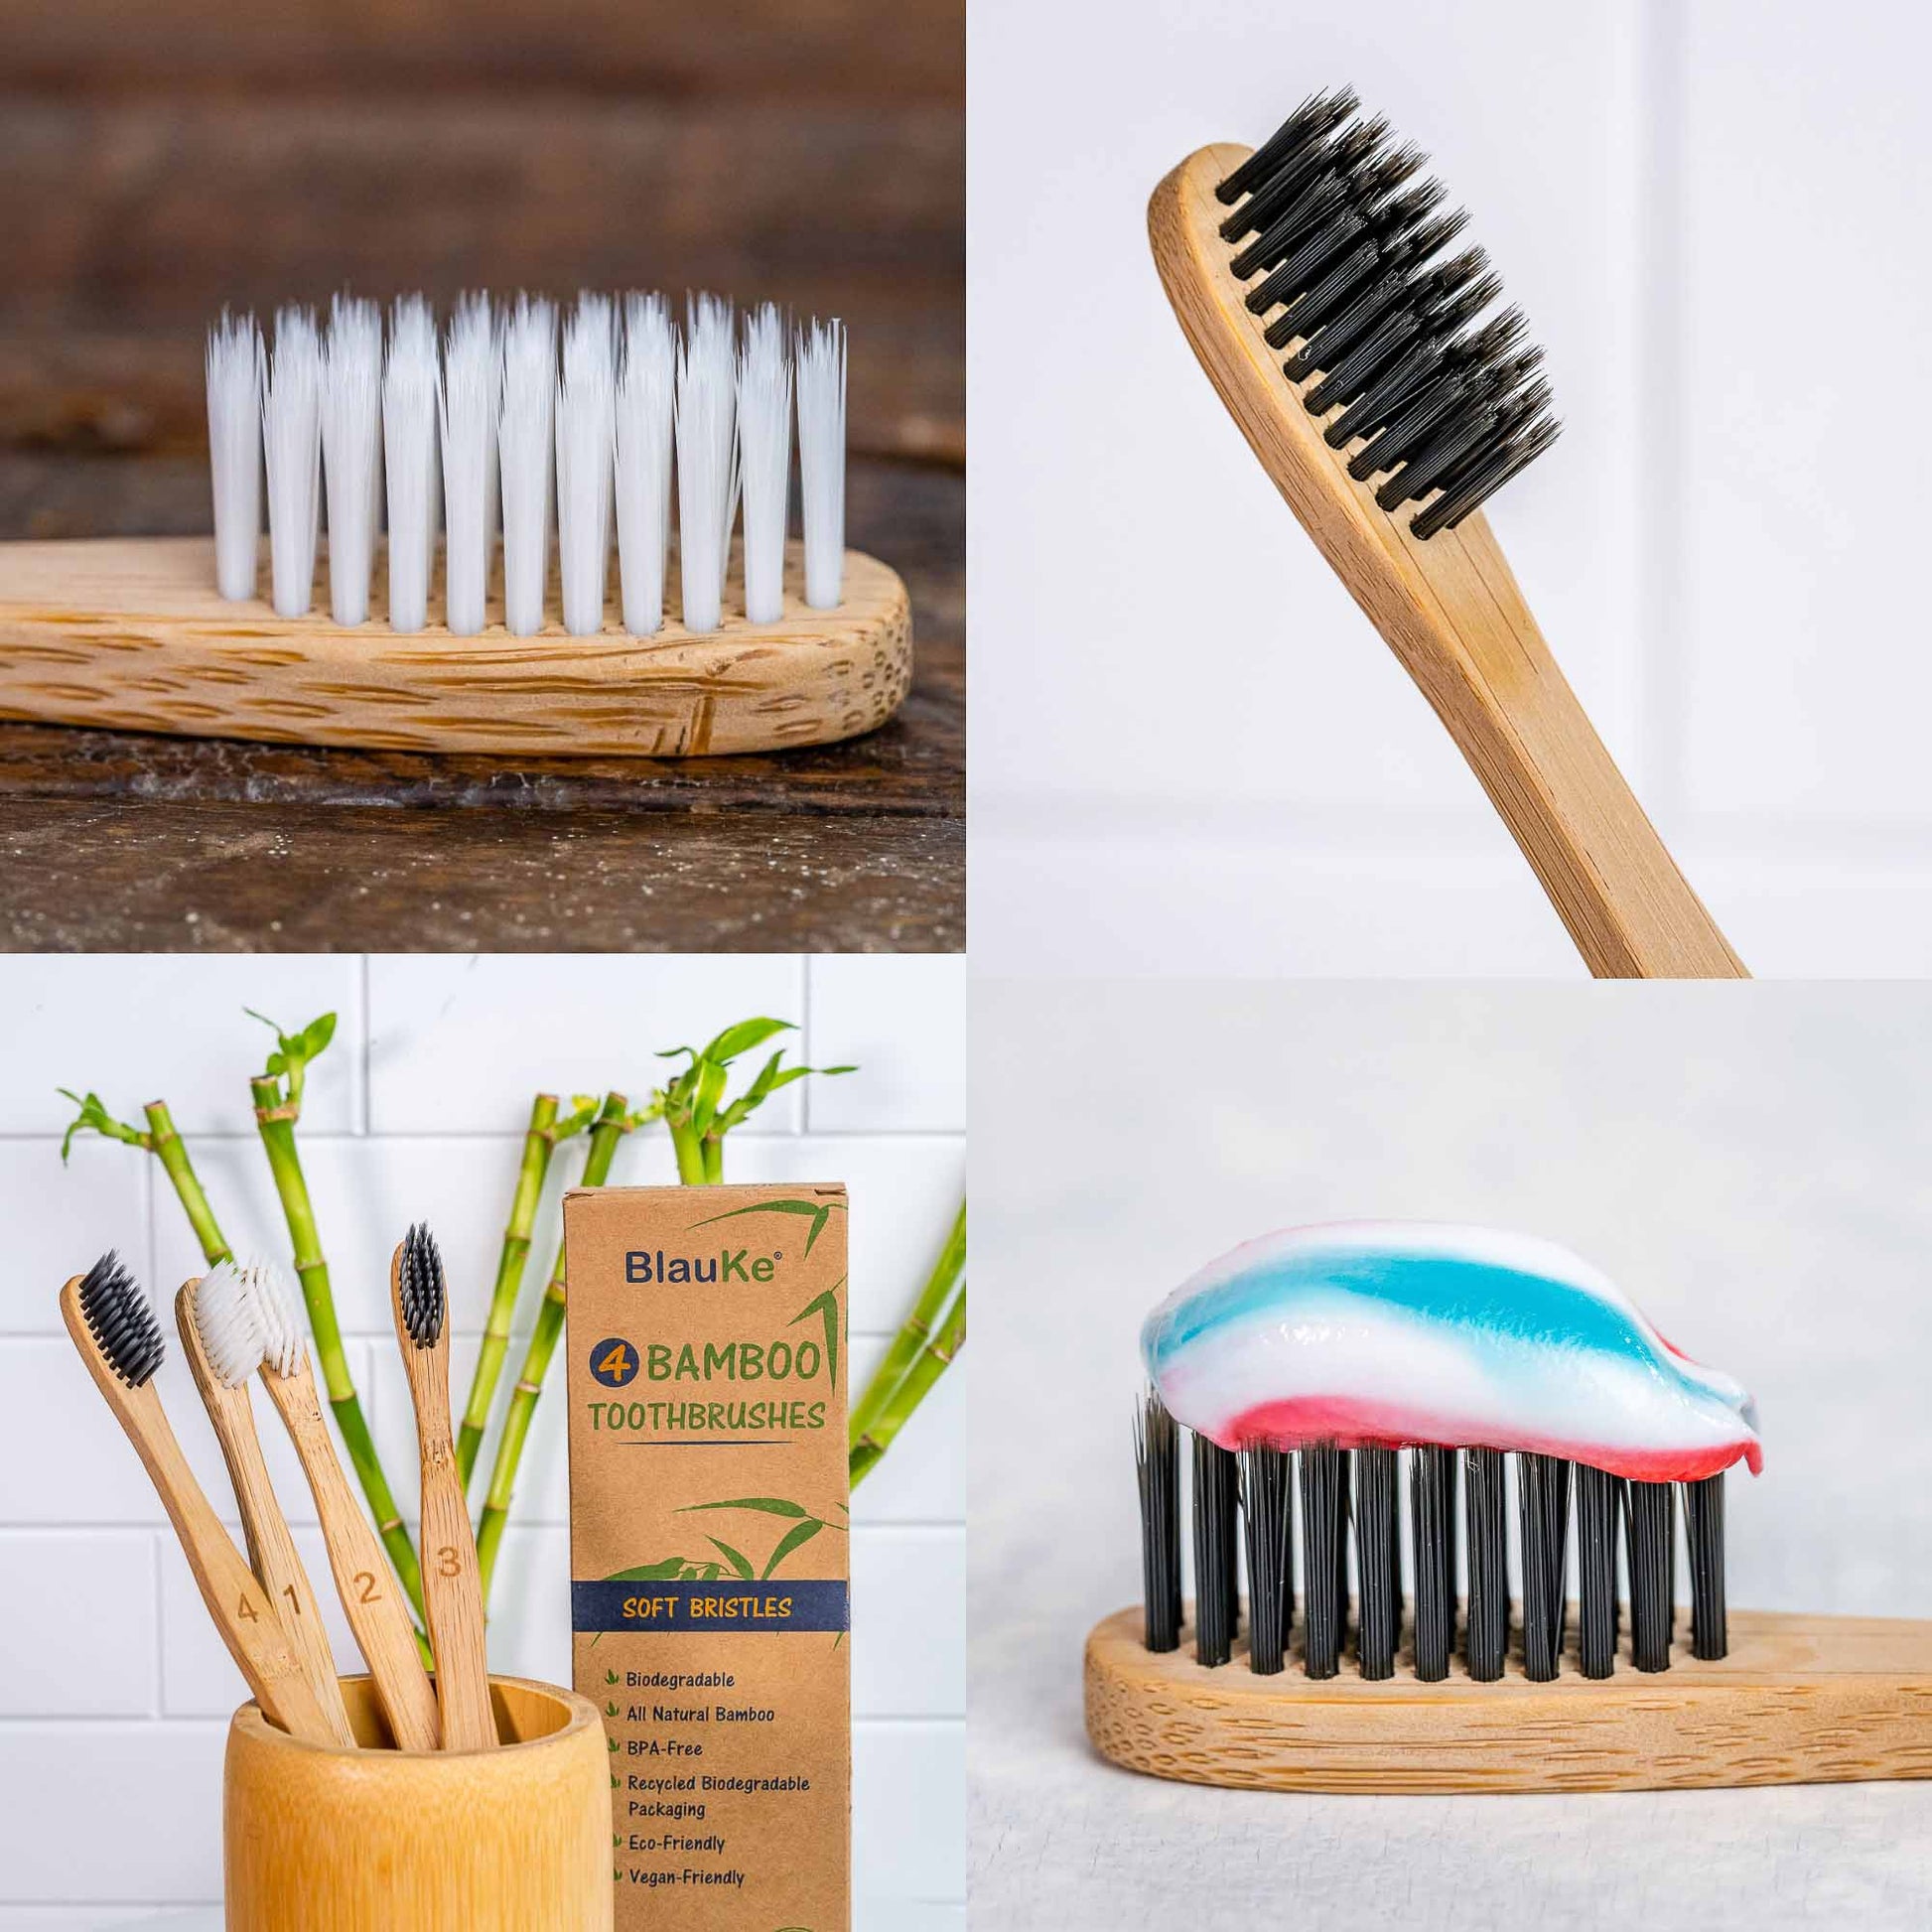 Bamboo Toothbrush Set 4-Pack - Bamboo Toothbrushes with Soft Bristles for Adults - Eco-Friendly, Biodegradable, Natural Wooden Toothbrushes-4